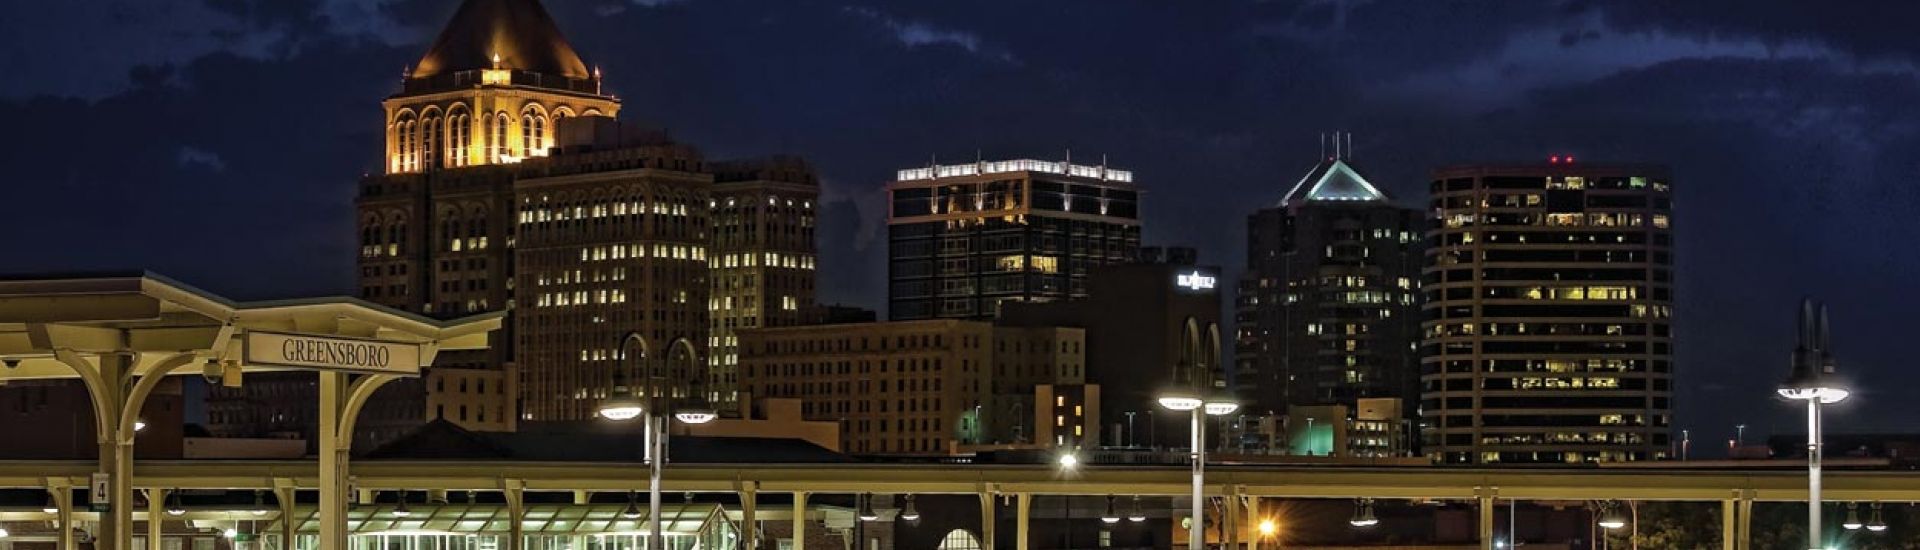 Greensboro-night-skyline-with-moon-by-dan-routh-photography 1